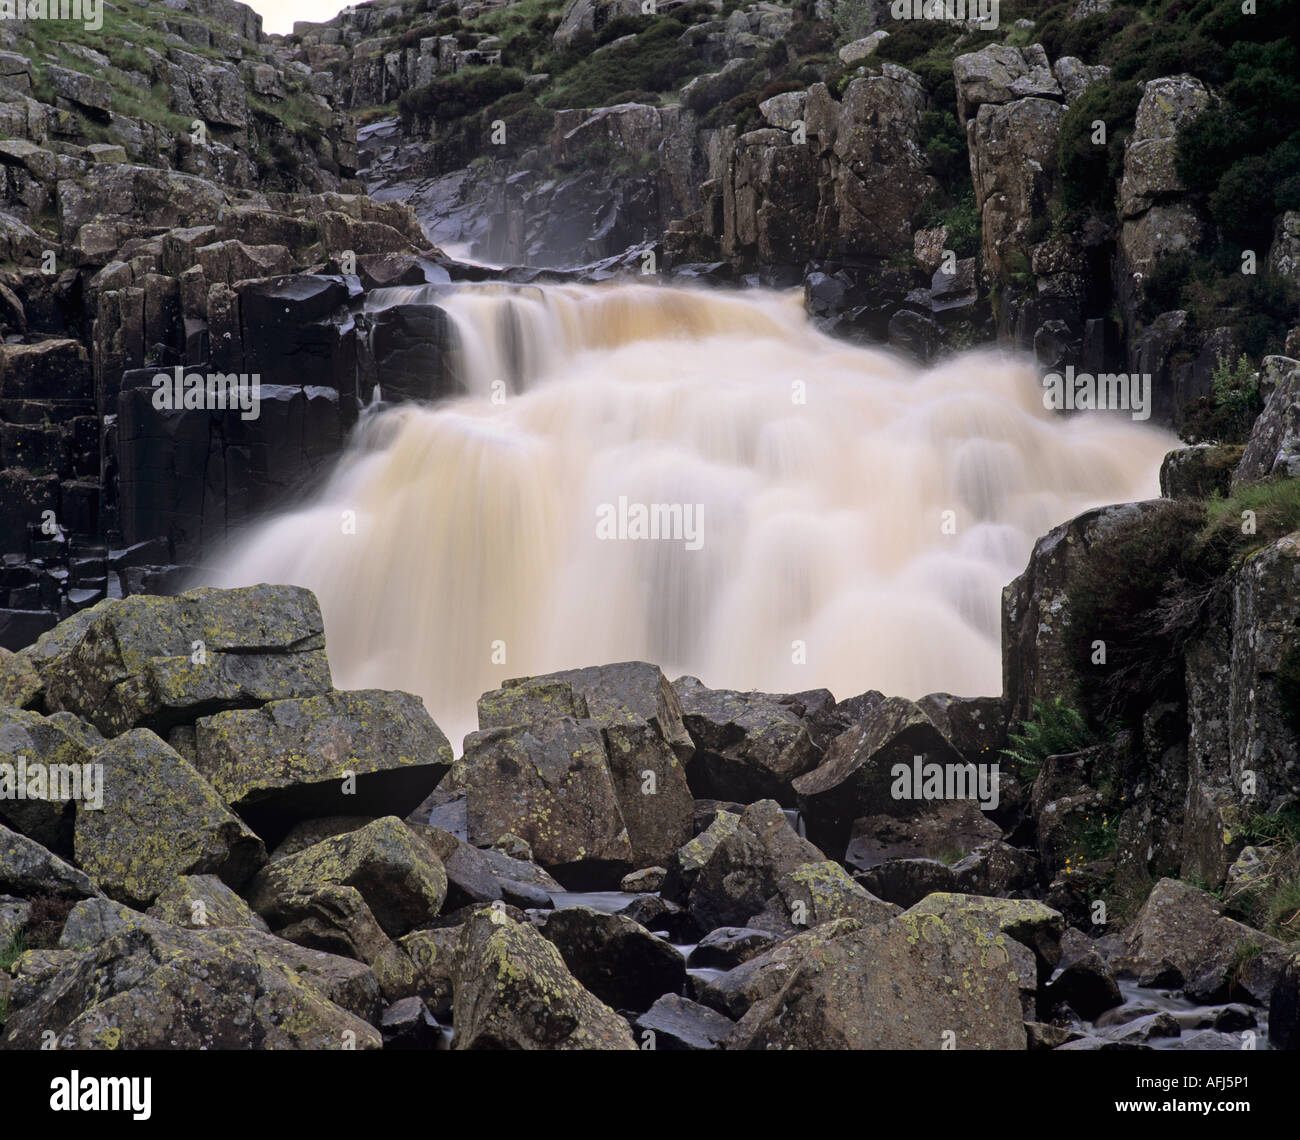 The River tees drops down the Cauldron Snout waterfall in Teesdale, County Durham, England UK Stock Photo